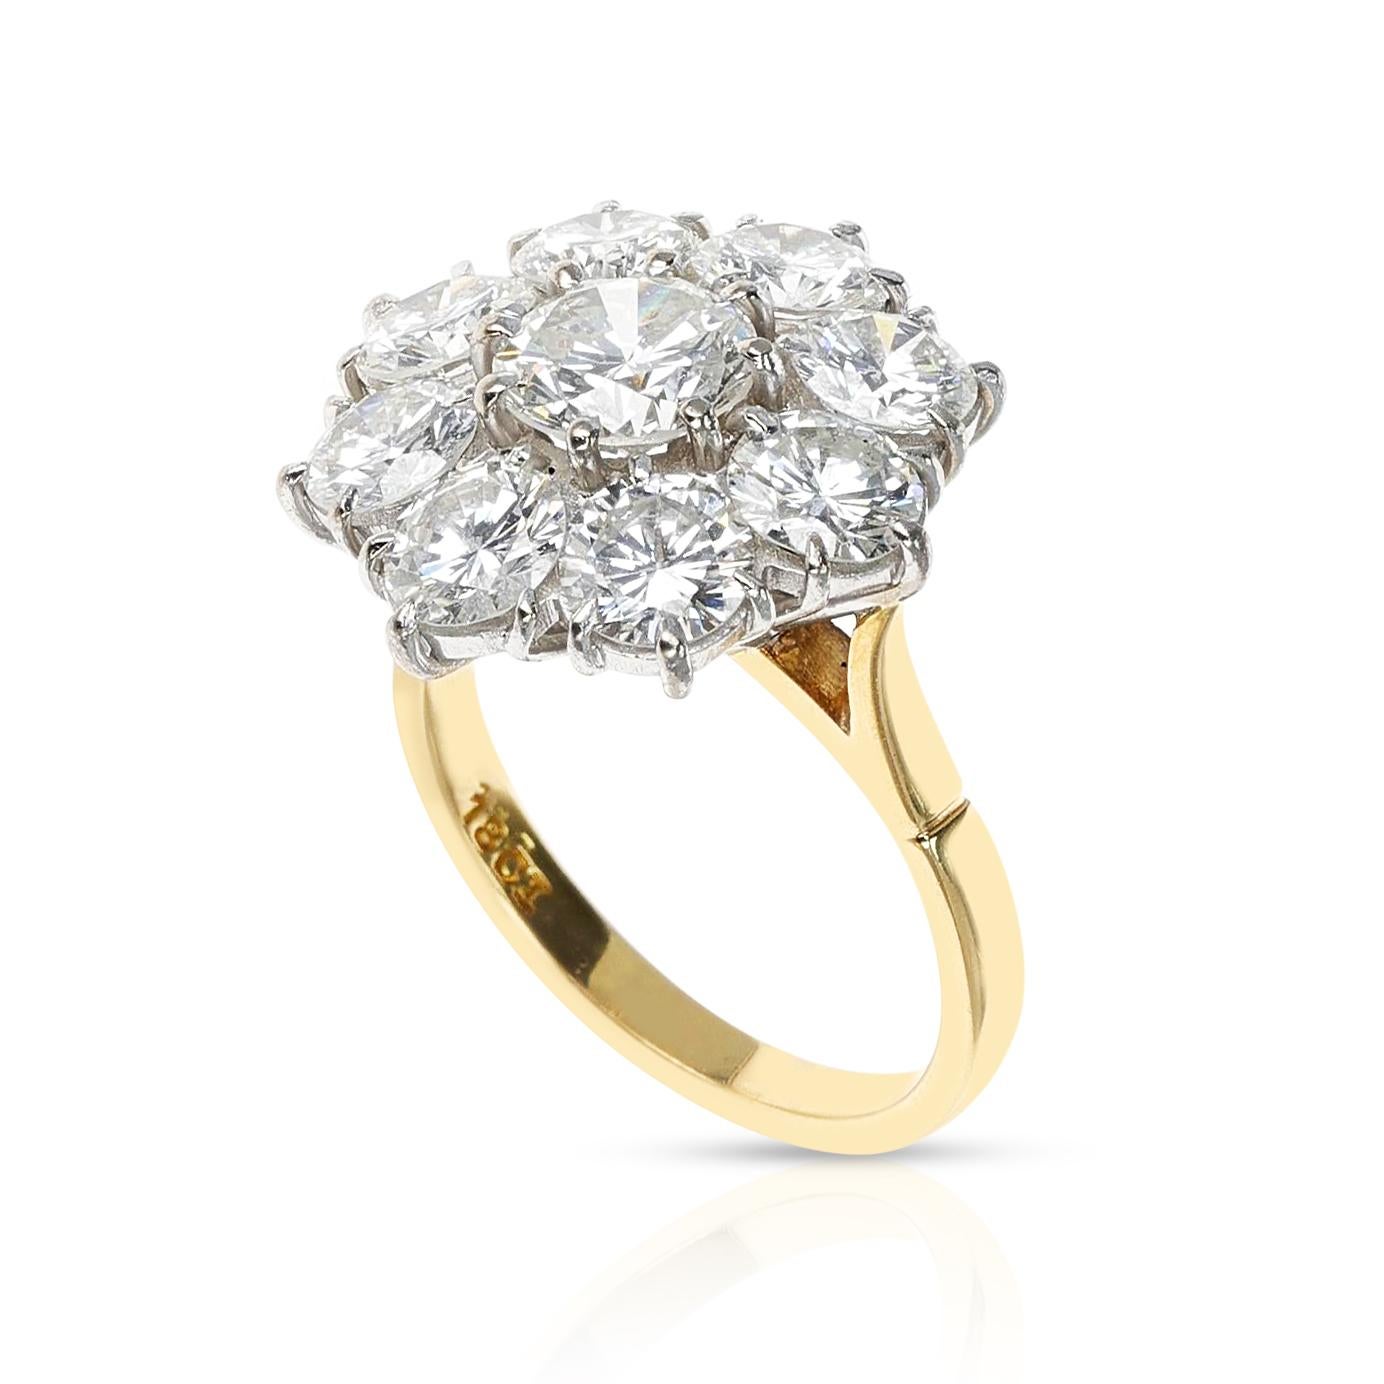 A floral diamond cluster ring with the center diamond as appx. 1 carat and the side diamonds as appx 3.35 carats. The color is appx F-G and the clarity is appx VS1. The ring is made in 18 Karat Yellow and White Gold. The ring size is 6.50 US and the